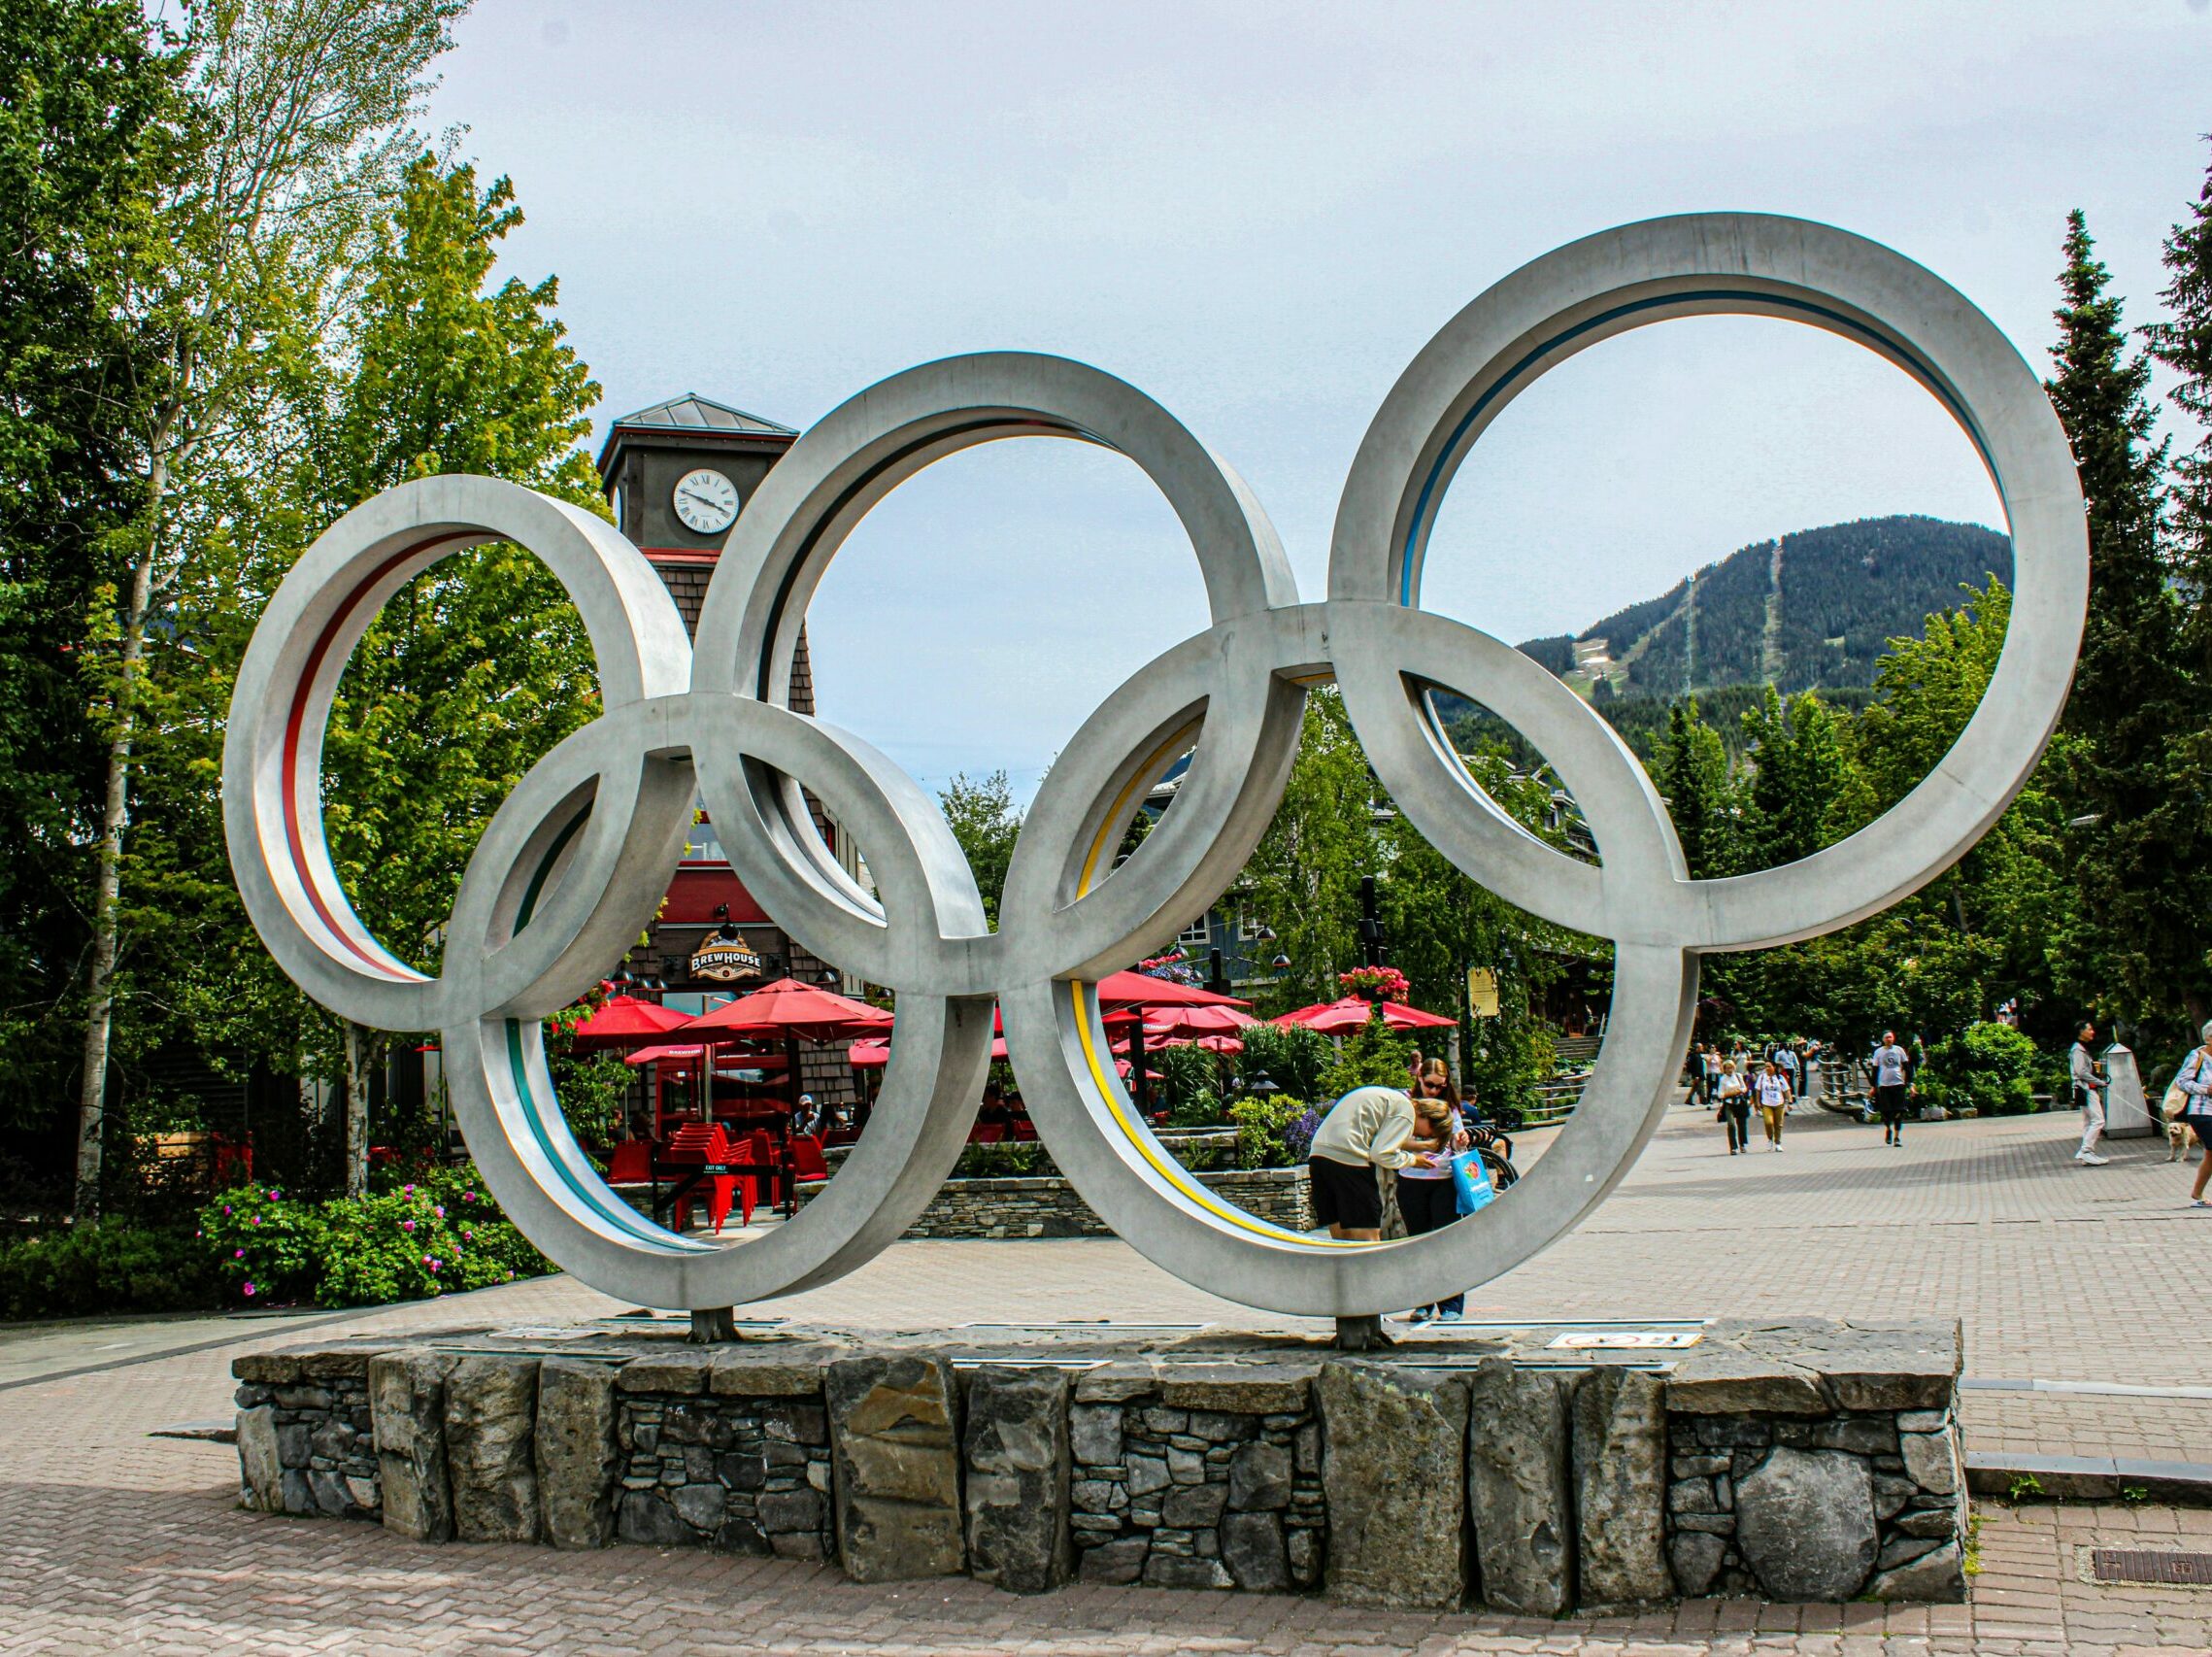 A statue of the olympic rings in a park